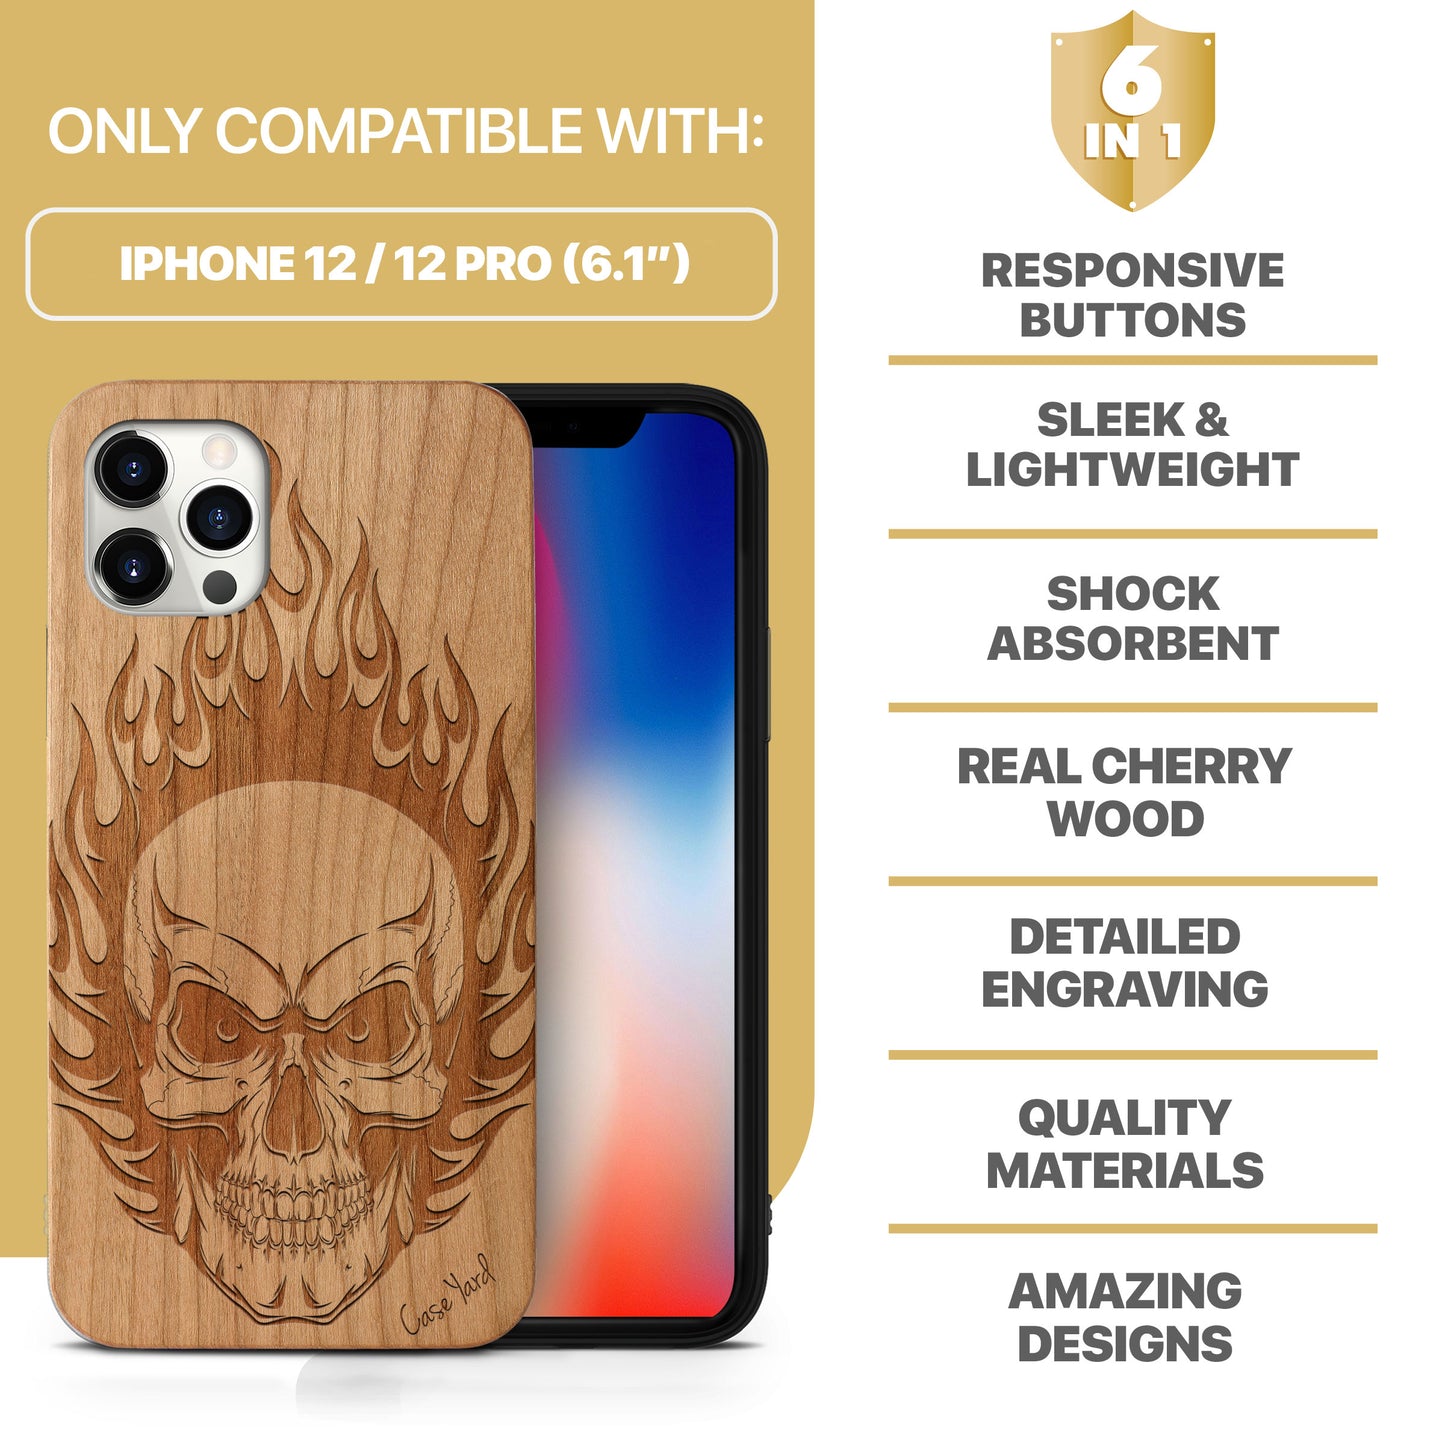 Wooden Cell Phone Case Cover, Laser Engraved case for iPhone & Samsung phone Skull On Fire Design